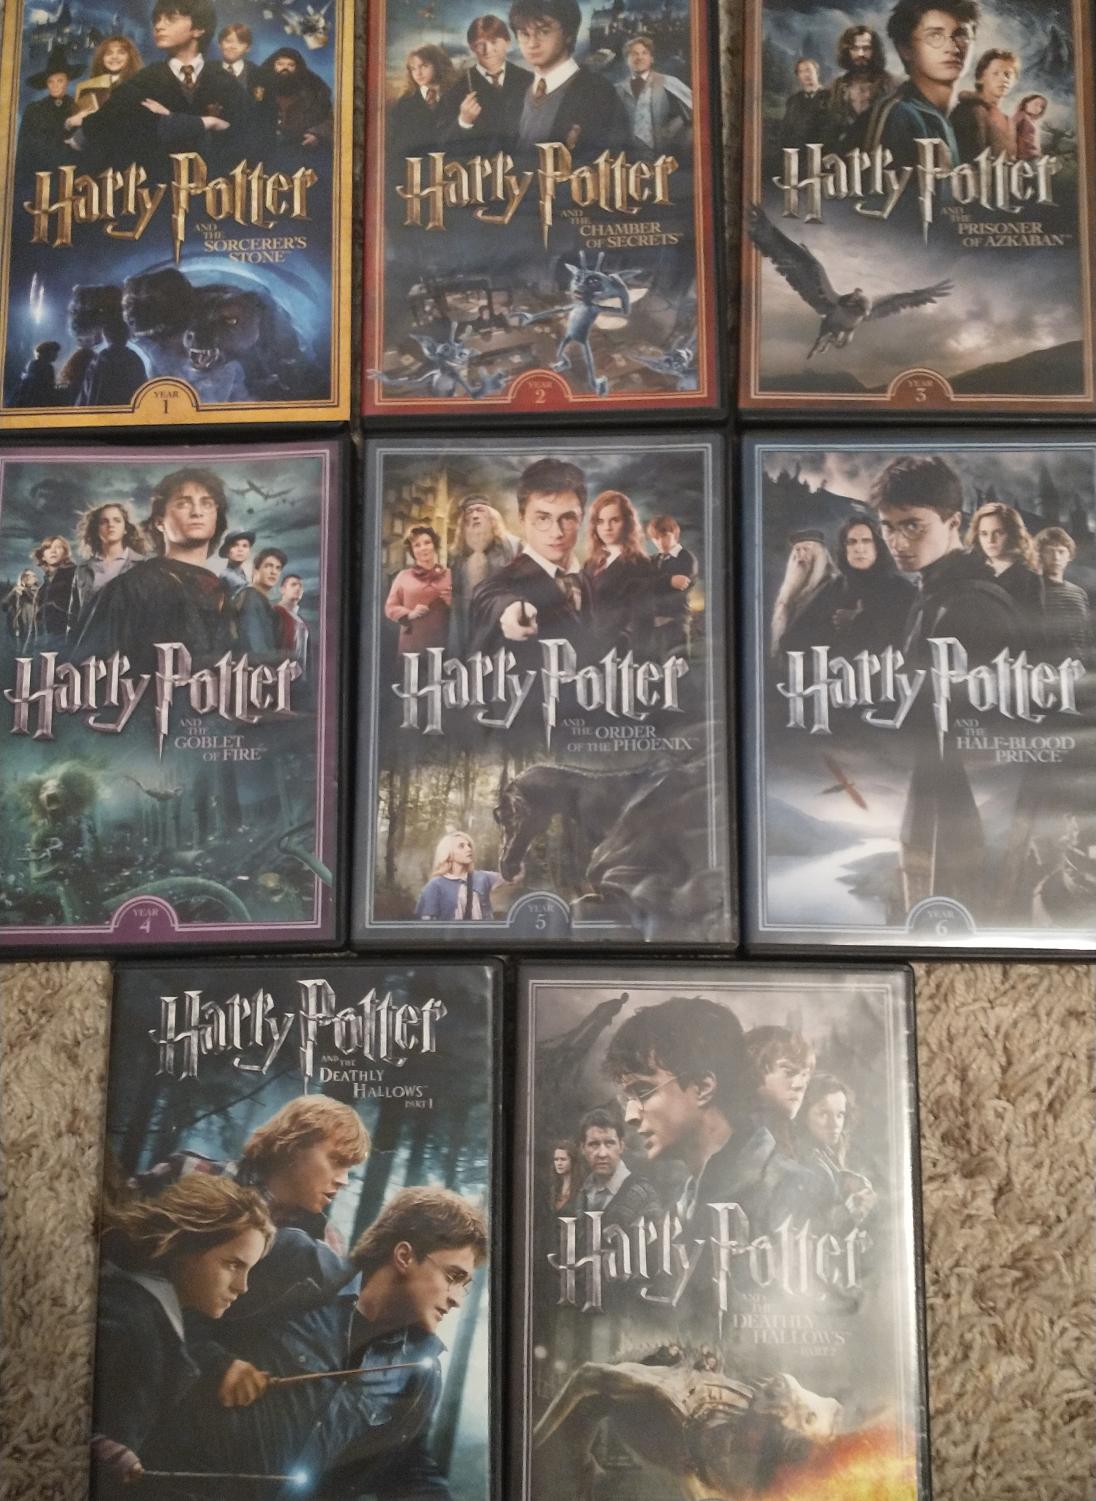 All eight Harry Potter movies could be a good idea for movies to watch during a movie marathon over winter break.